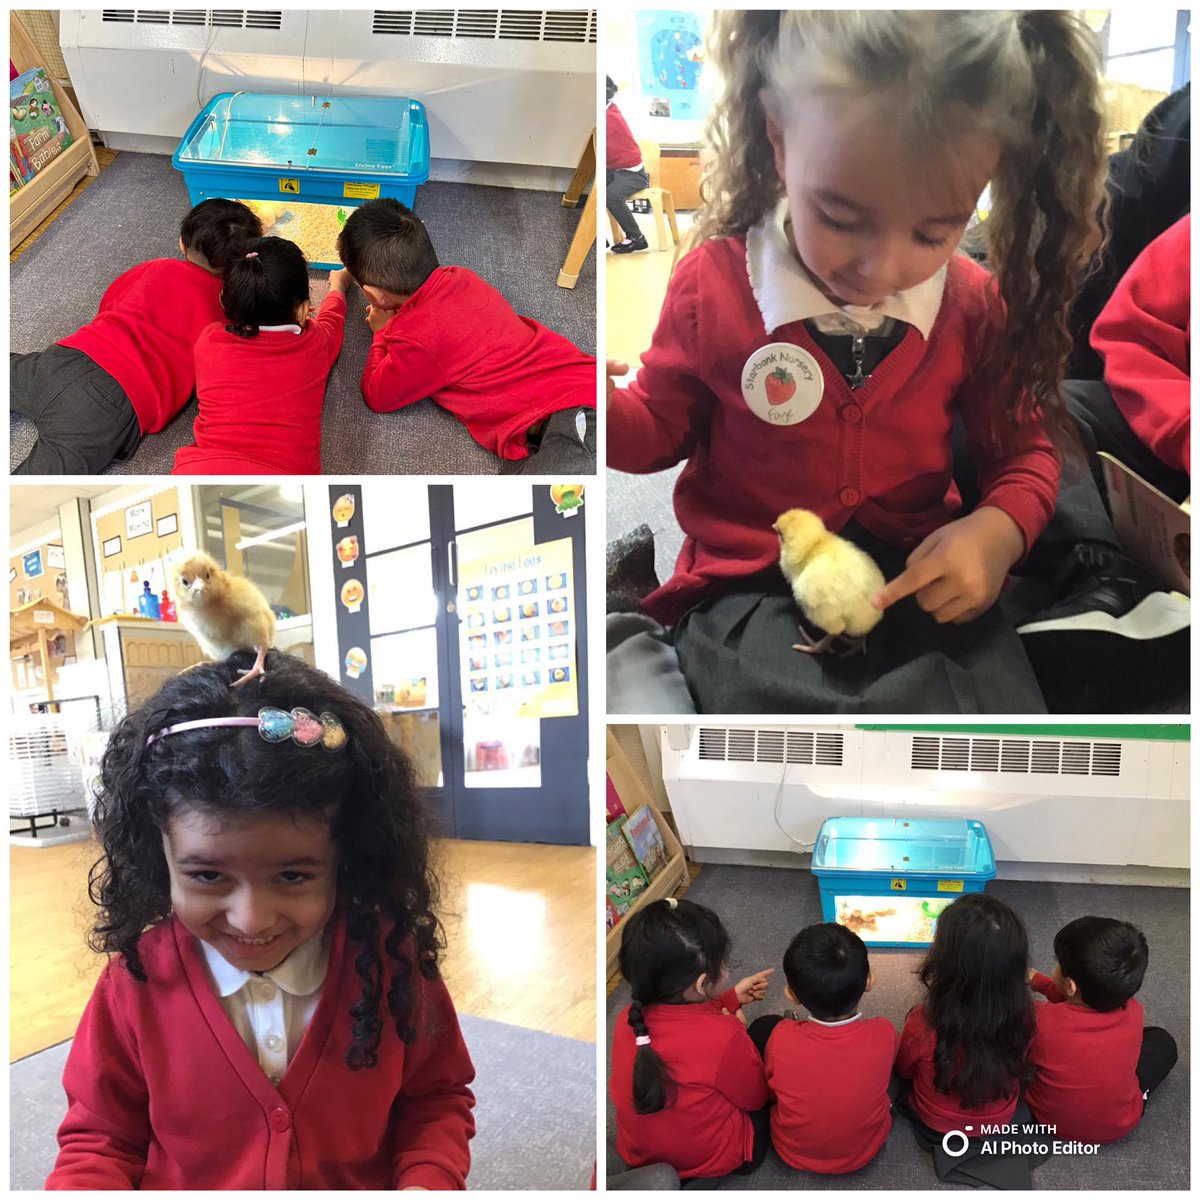 Our nursery kids joyfully welcomed nine new chicks, eagerly holding and caring for them, from incubator to cozy home. 🐣🏠 #WeAreStar